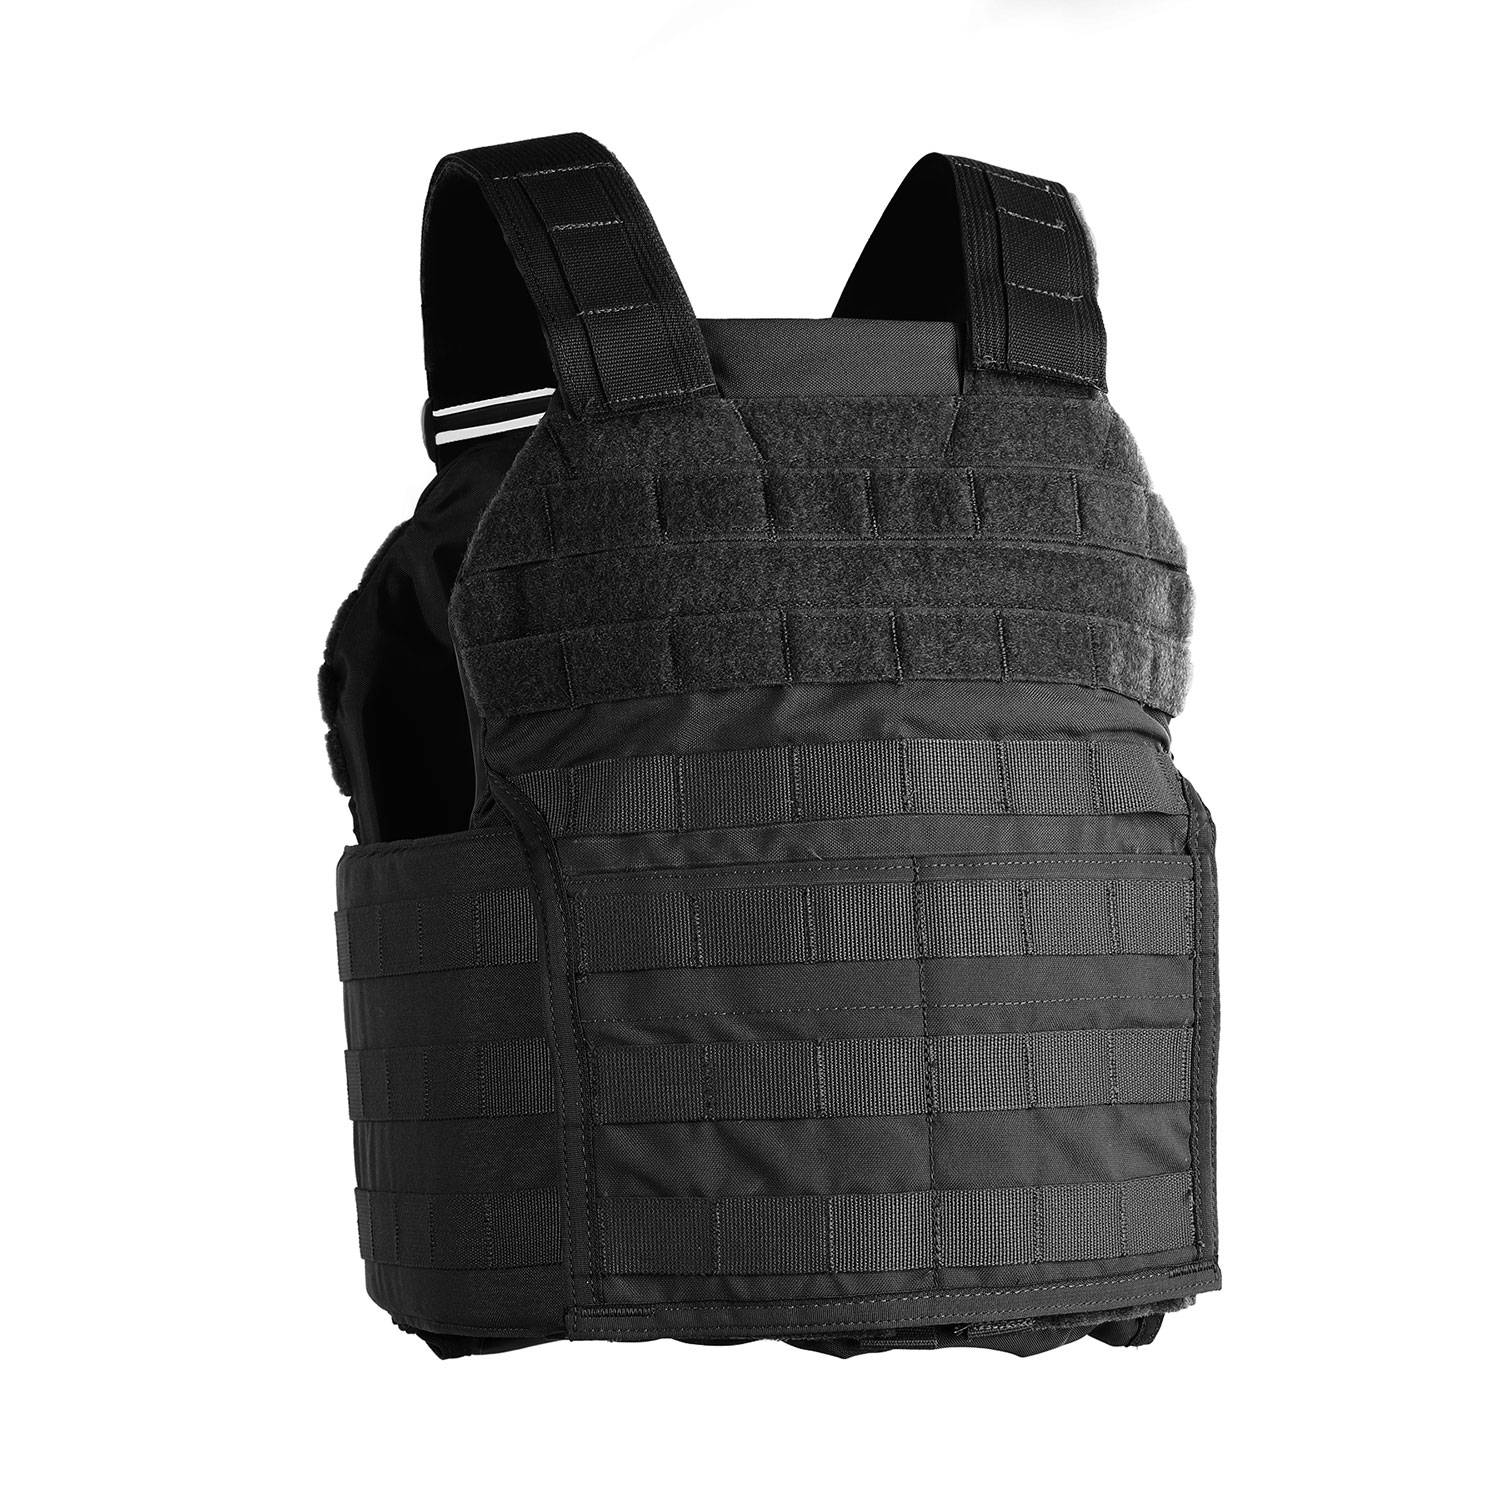 GALLS GTAC PLATE CARRIER